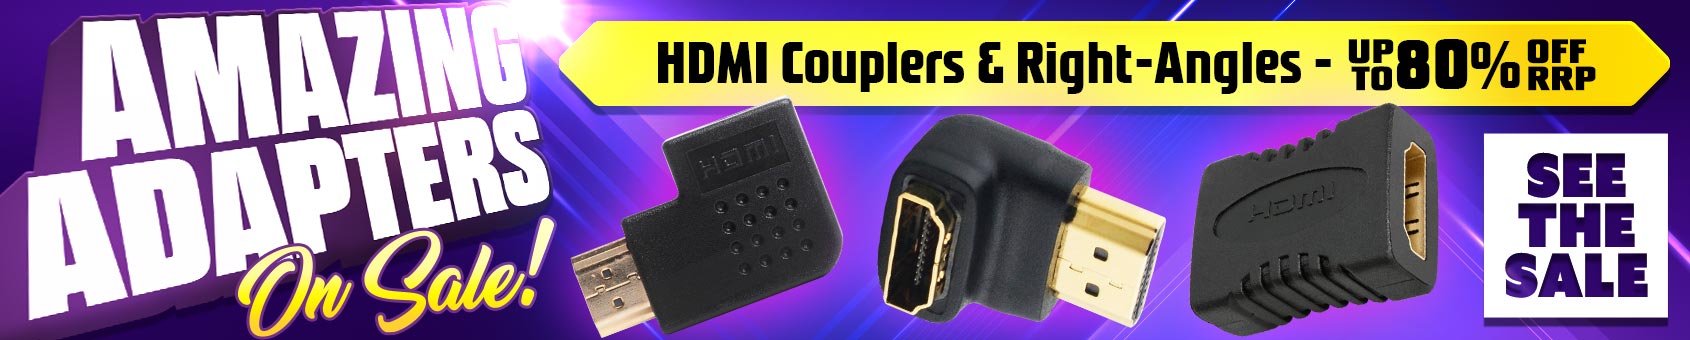 Our BIGGEST SALE EVER on Analogue HDMI Adapters during April!!!